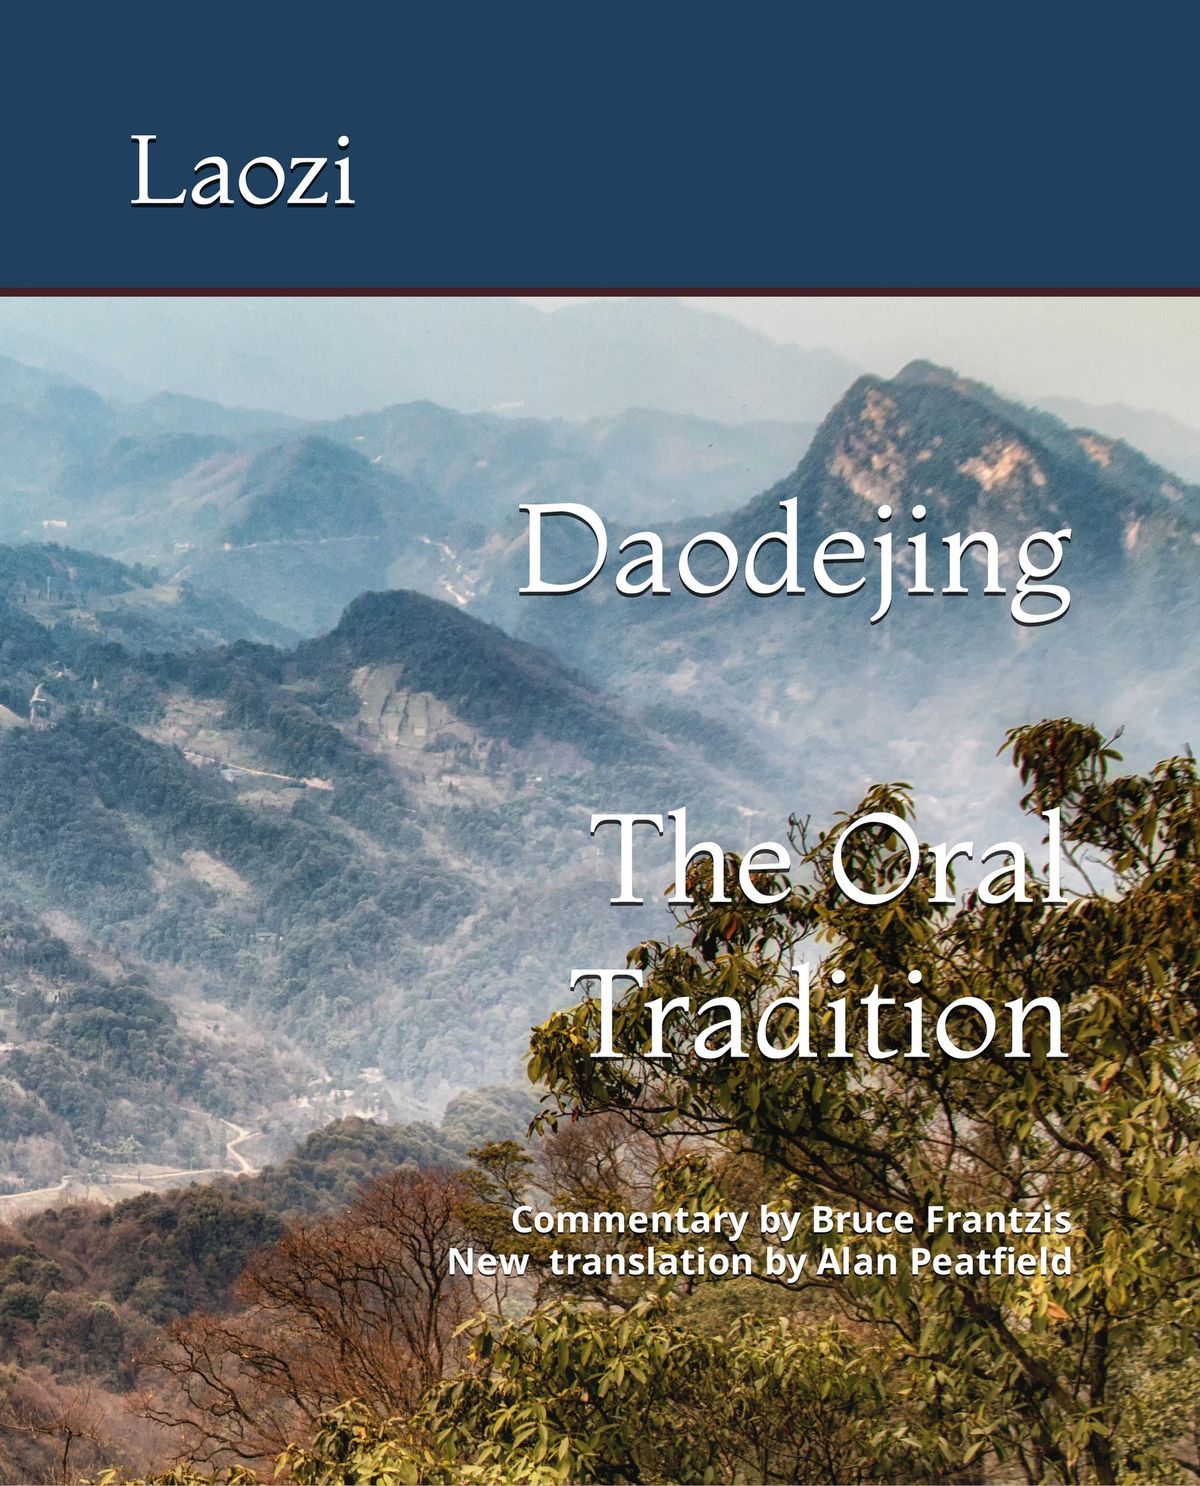 The Daoist Meditation Practices of the Daodejing